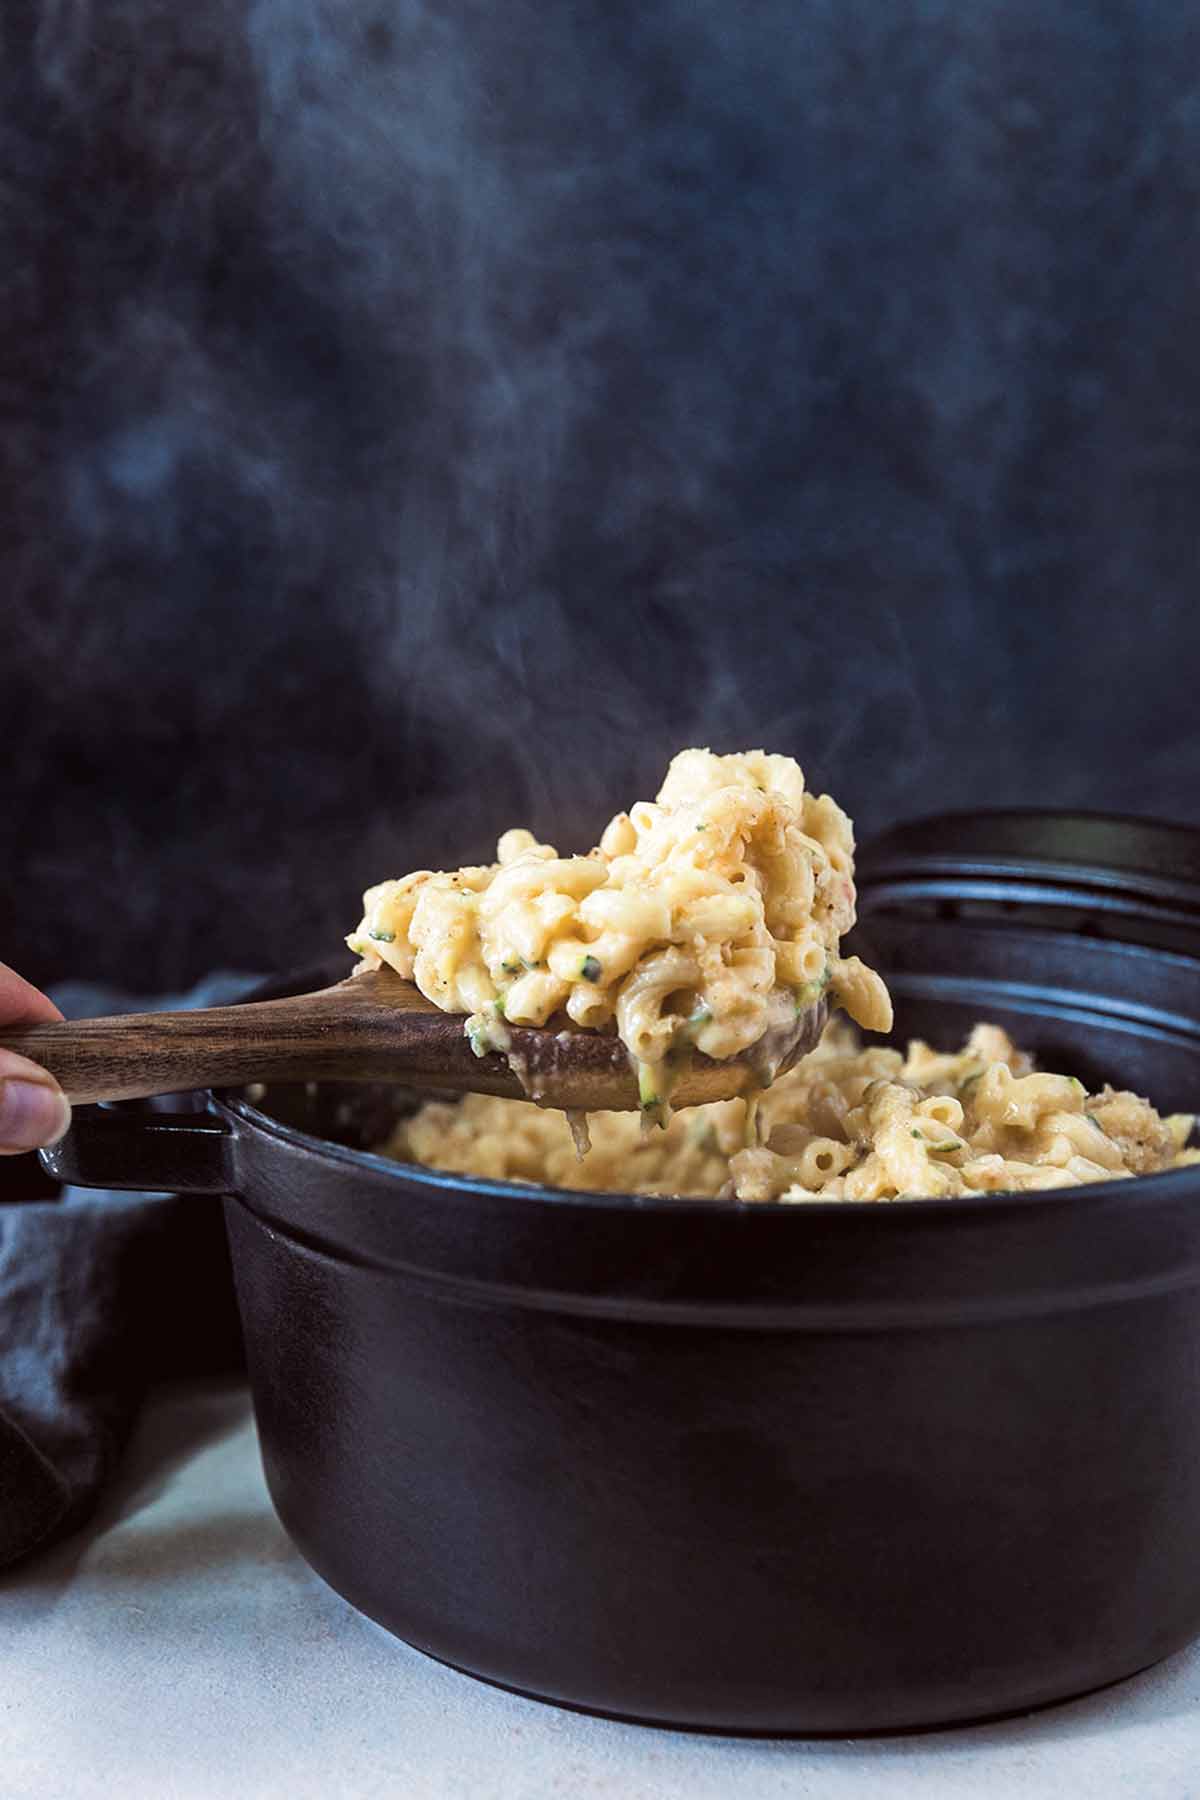 A hand using a wooden spoon to lift a scoop of macaroni and cheese with zucchini out of a cast iron pot.